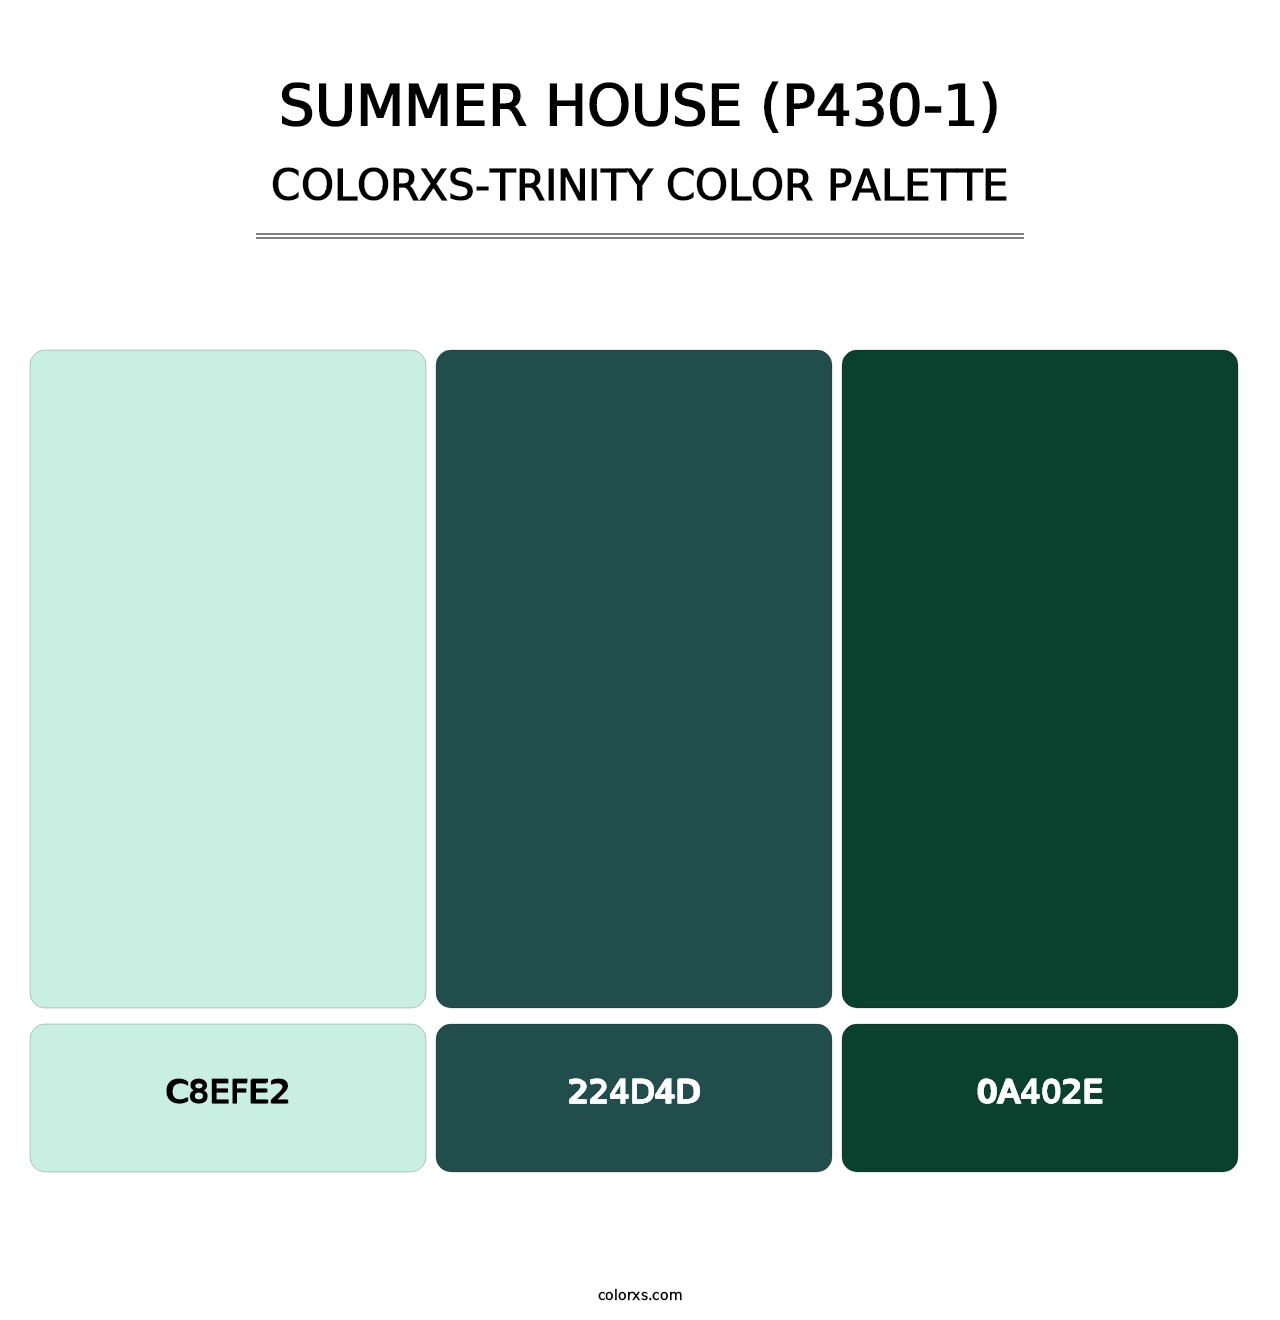 Summer House (P430-1) - Colorxs Trinity Palette